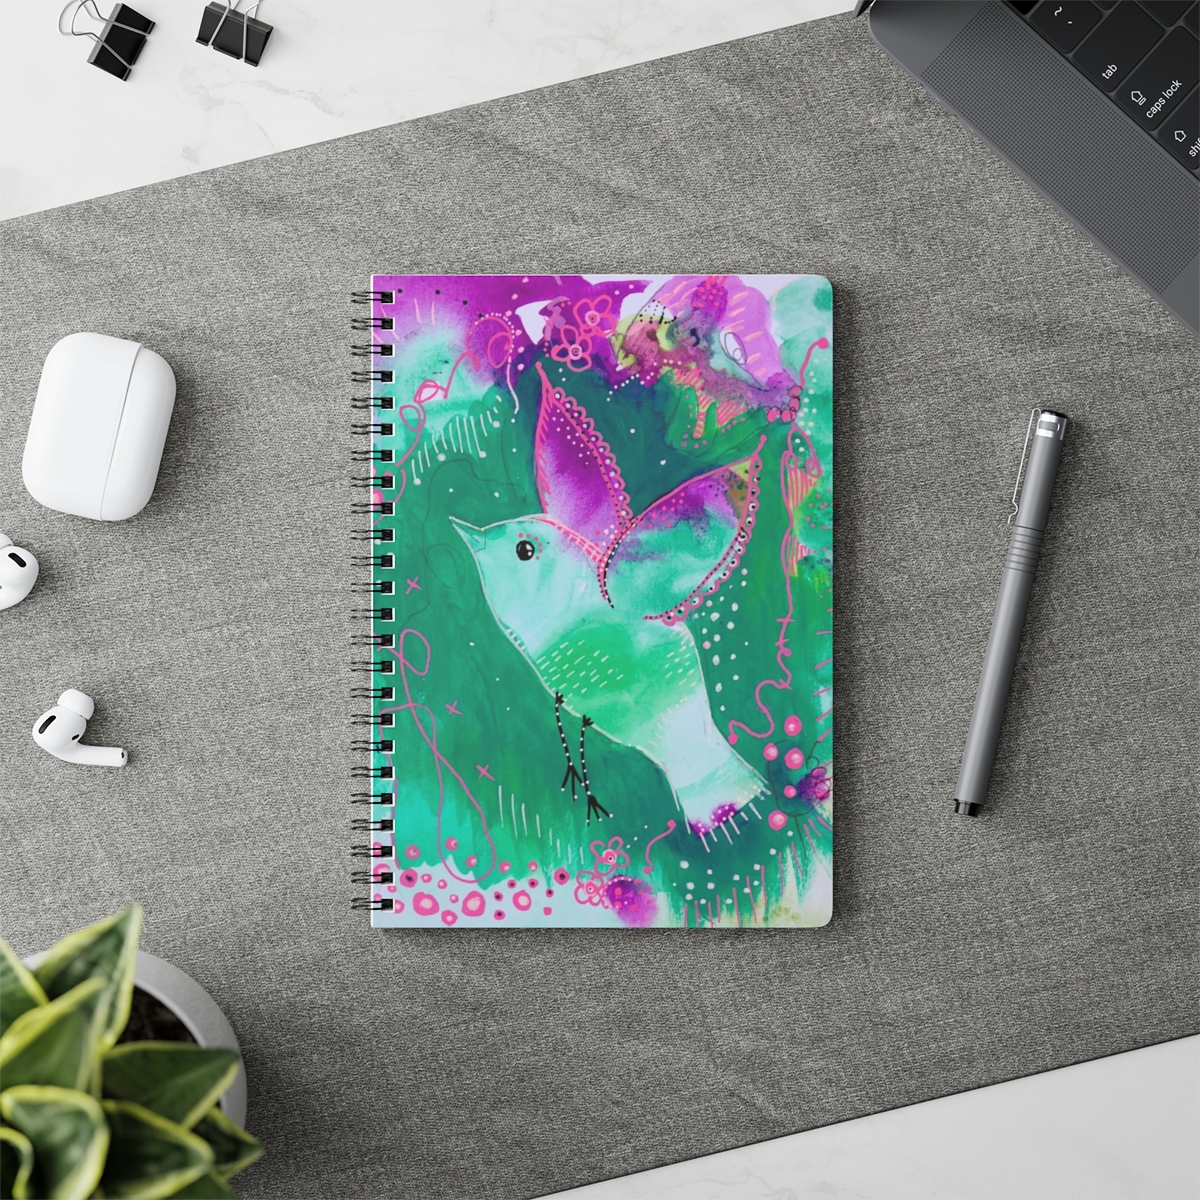 Whimsical bird notebook in context. Bird flying is created from green and violet tones that match her background.